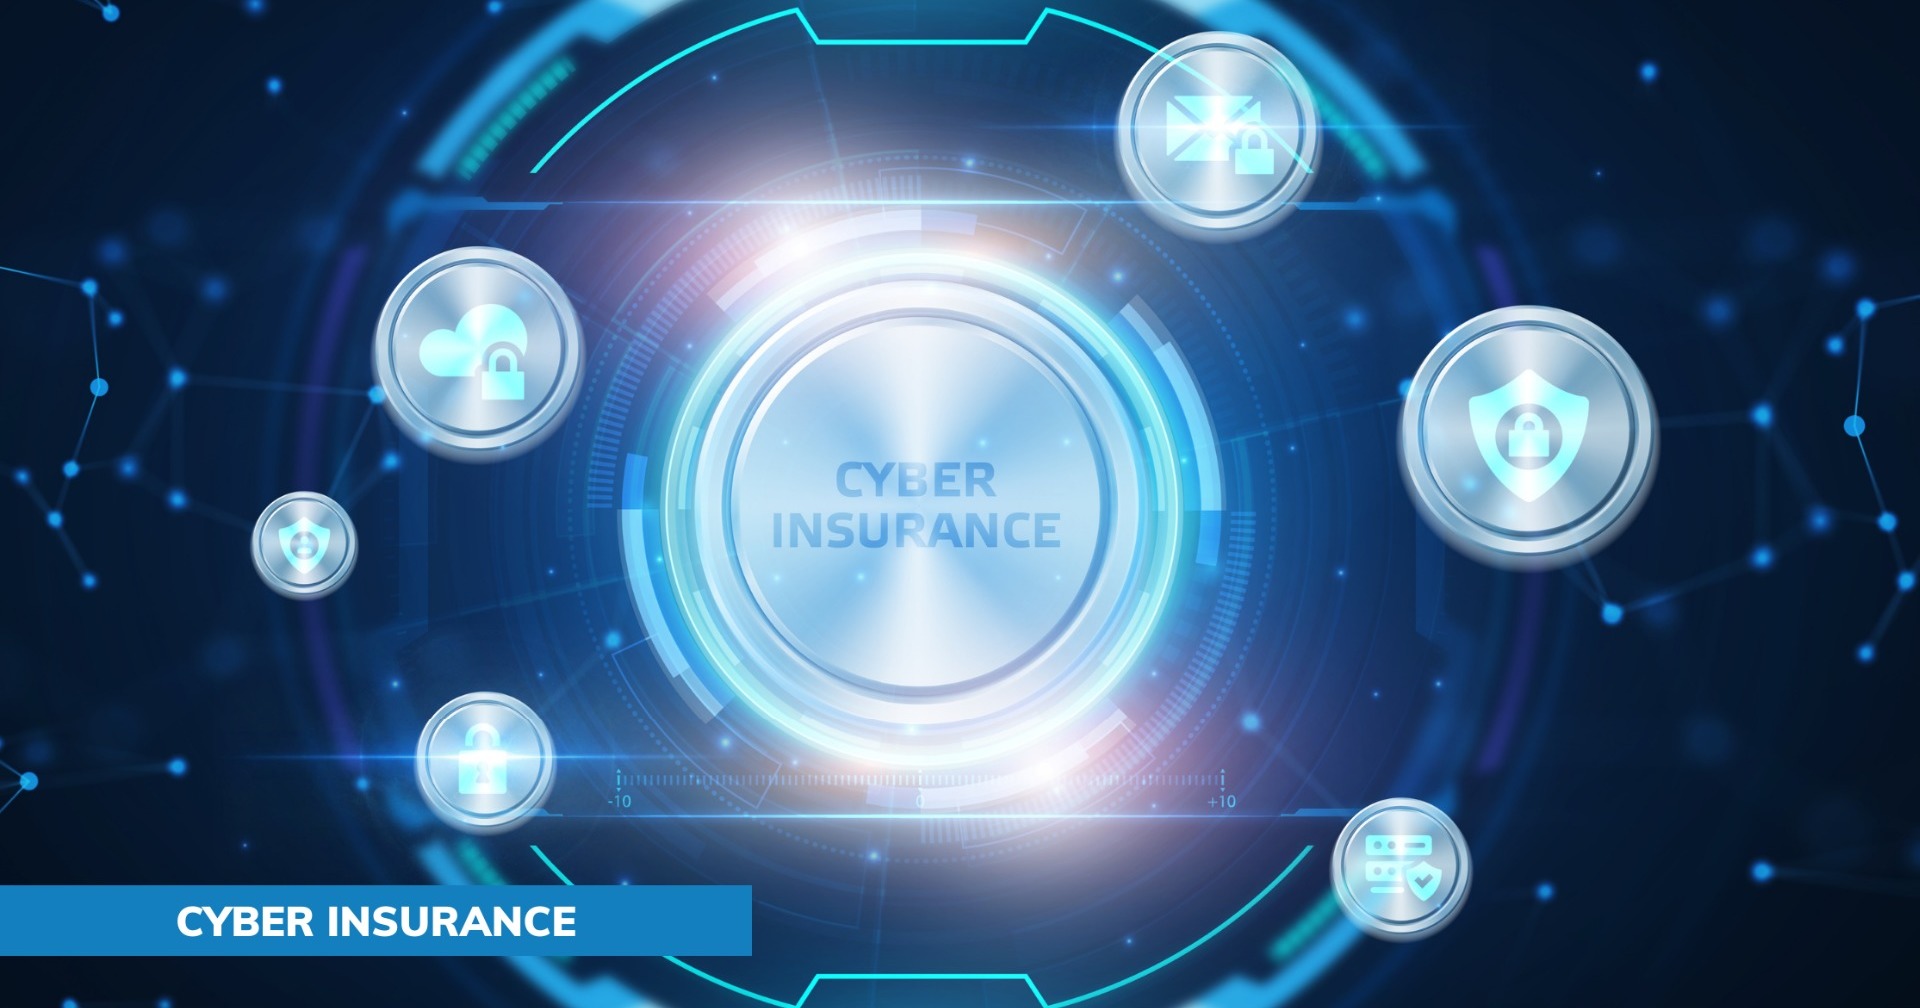 A New Approach for Cyber insurance